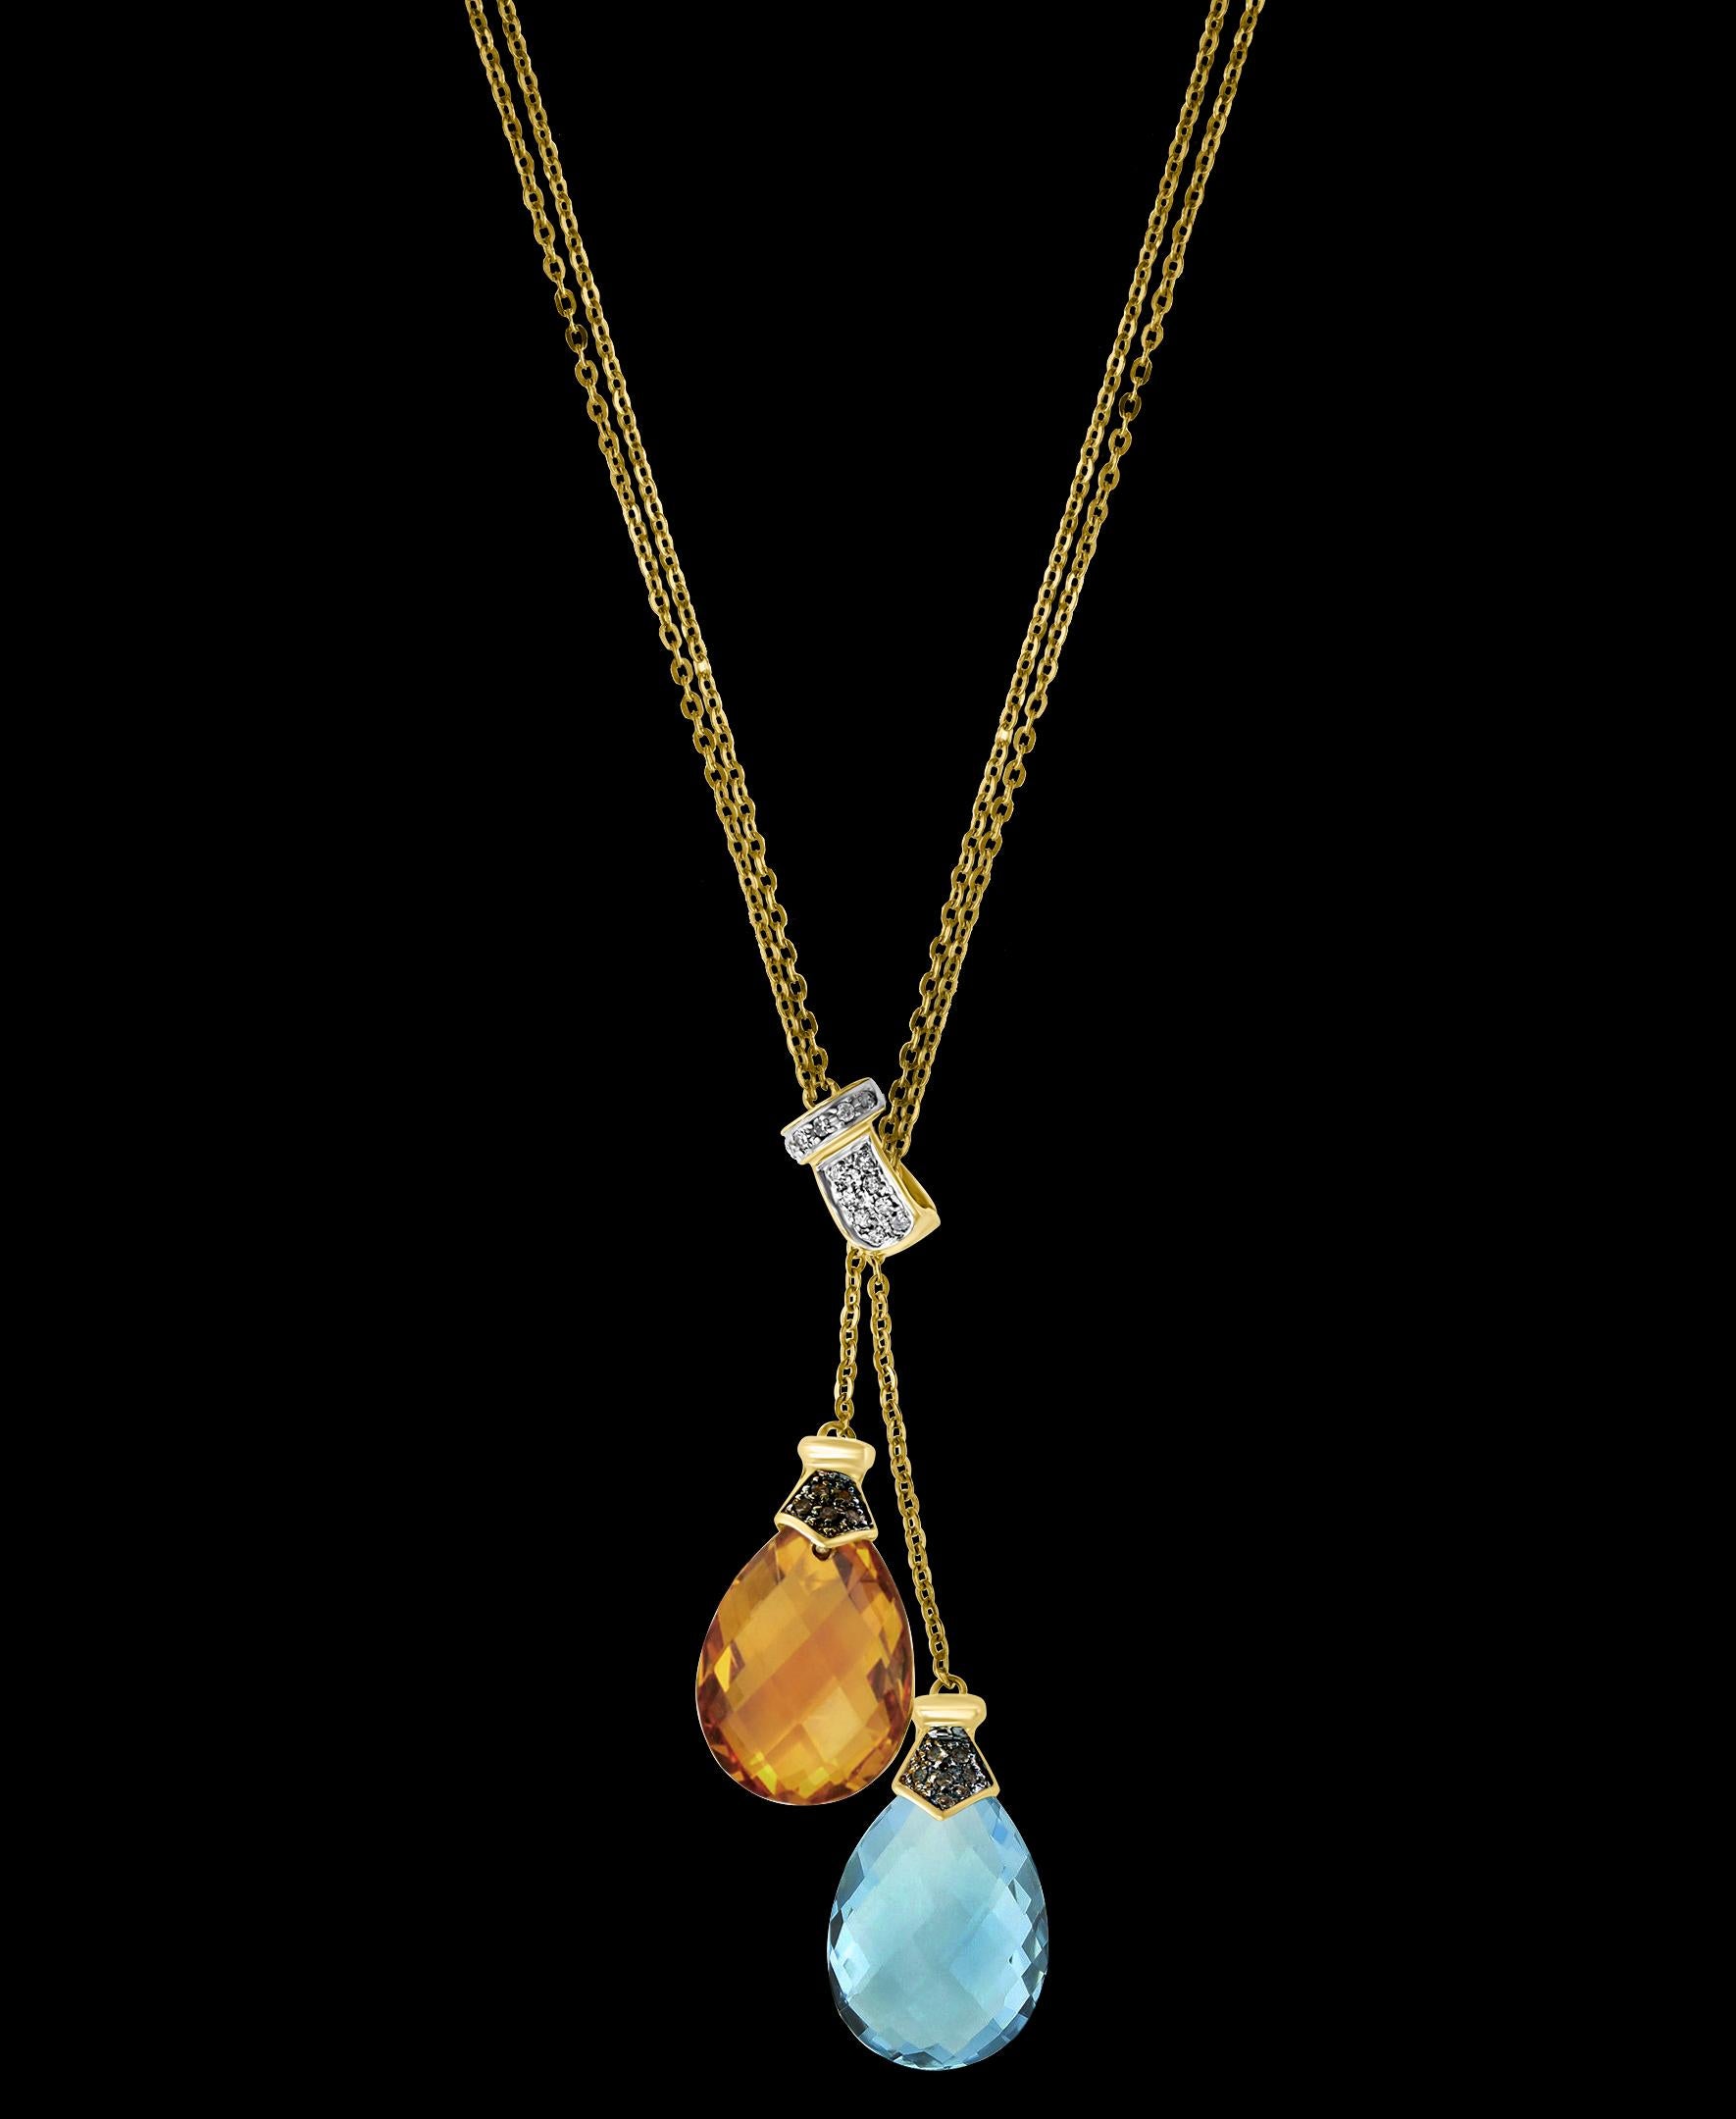 Checkerboard  Citrine & Blue Topaz  Pendent/Necklace 14 Karat Gold Double Chain
Two Drops one  Citrin Drop and one Blue Topaz drop , Both have checkerboard design and a diamond cap on them.
Pendant necklace is a eye-catching pendant necklace . It